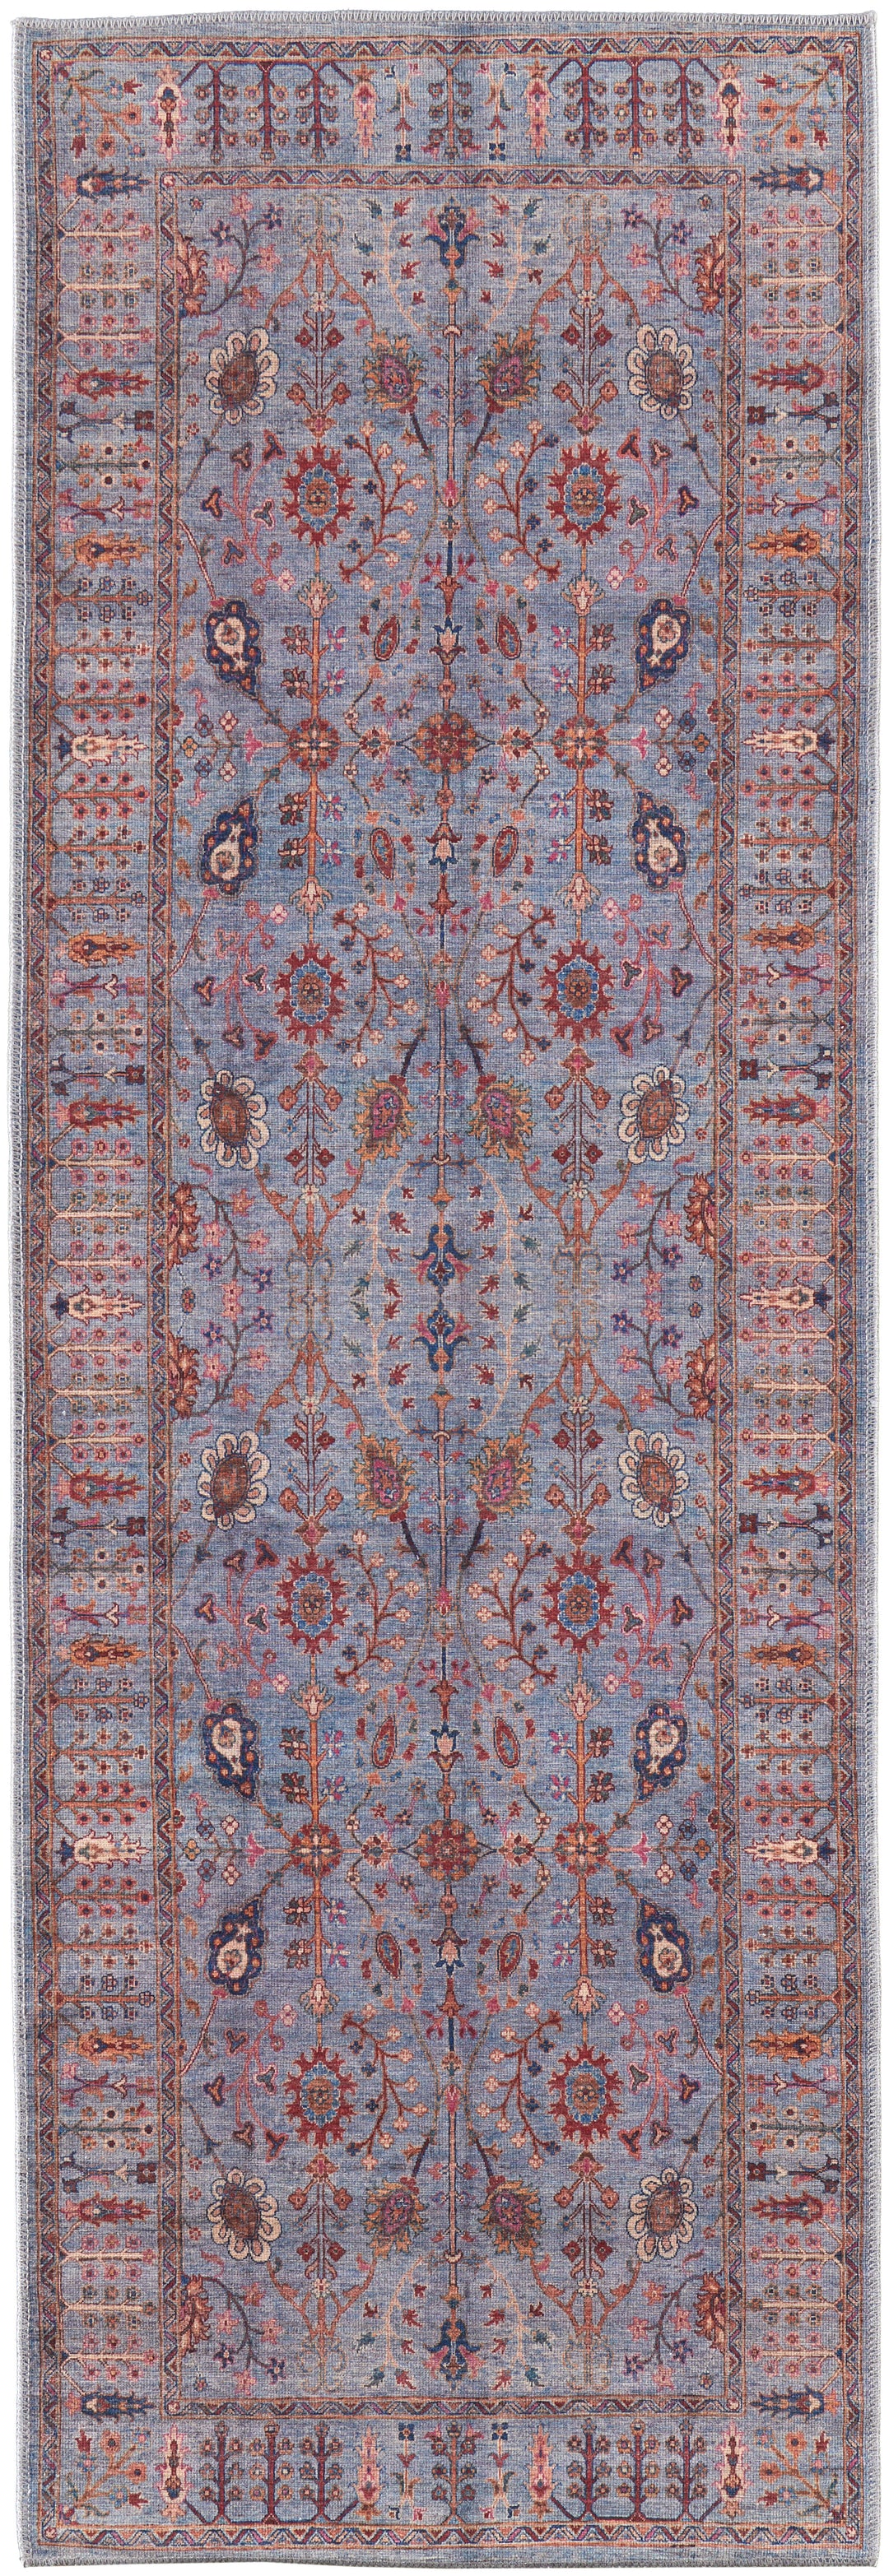 Rawlins Transitional Oriental Runner Available in 5 Colors